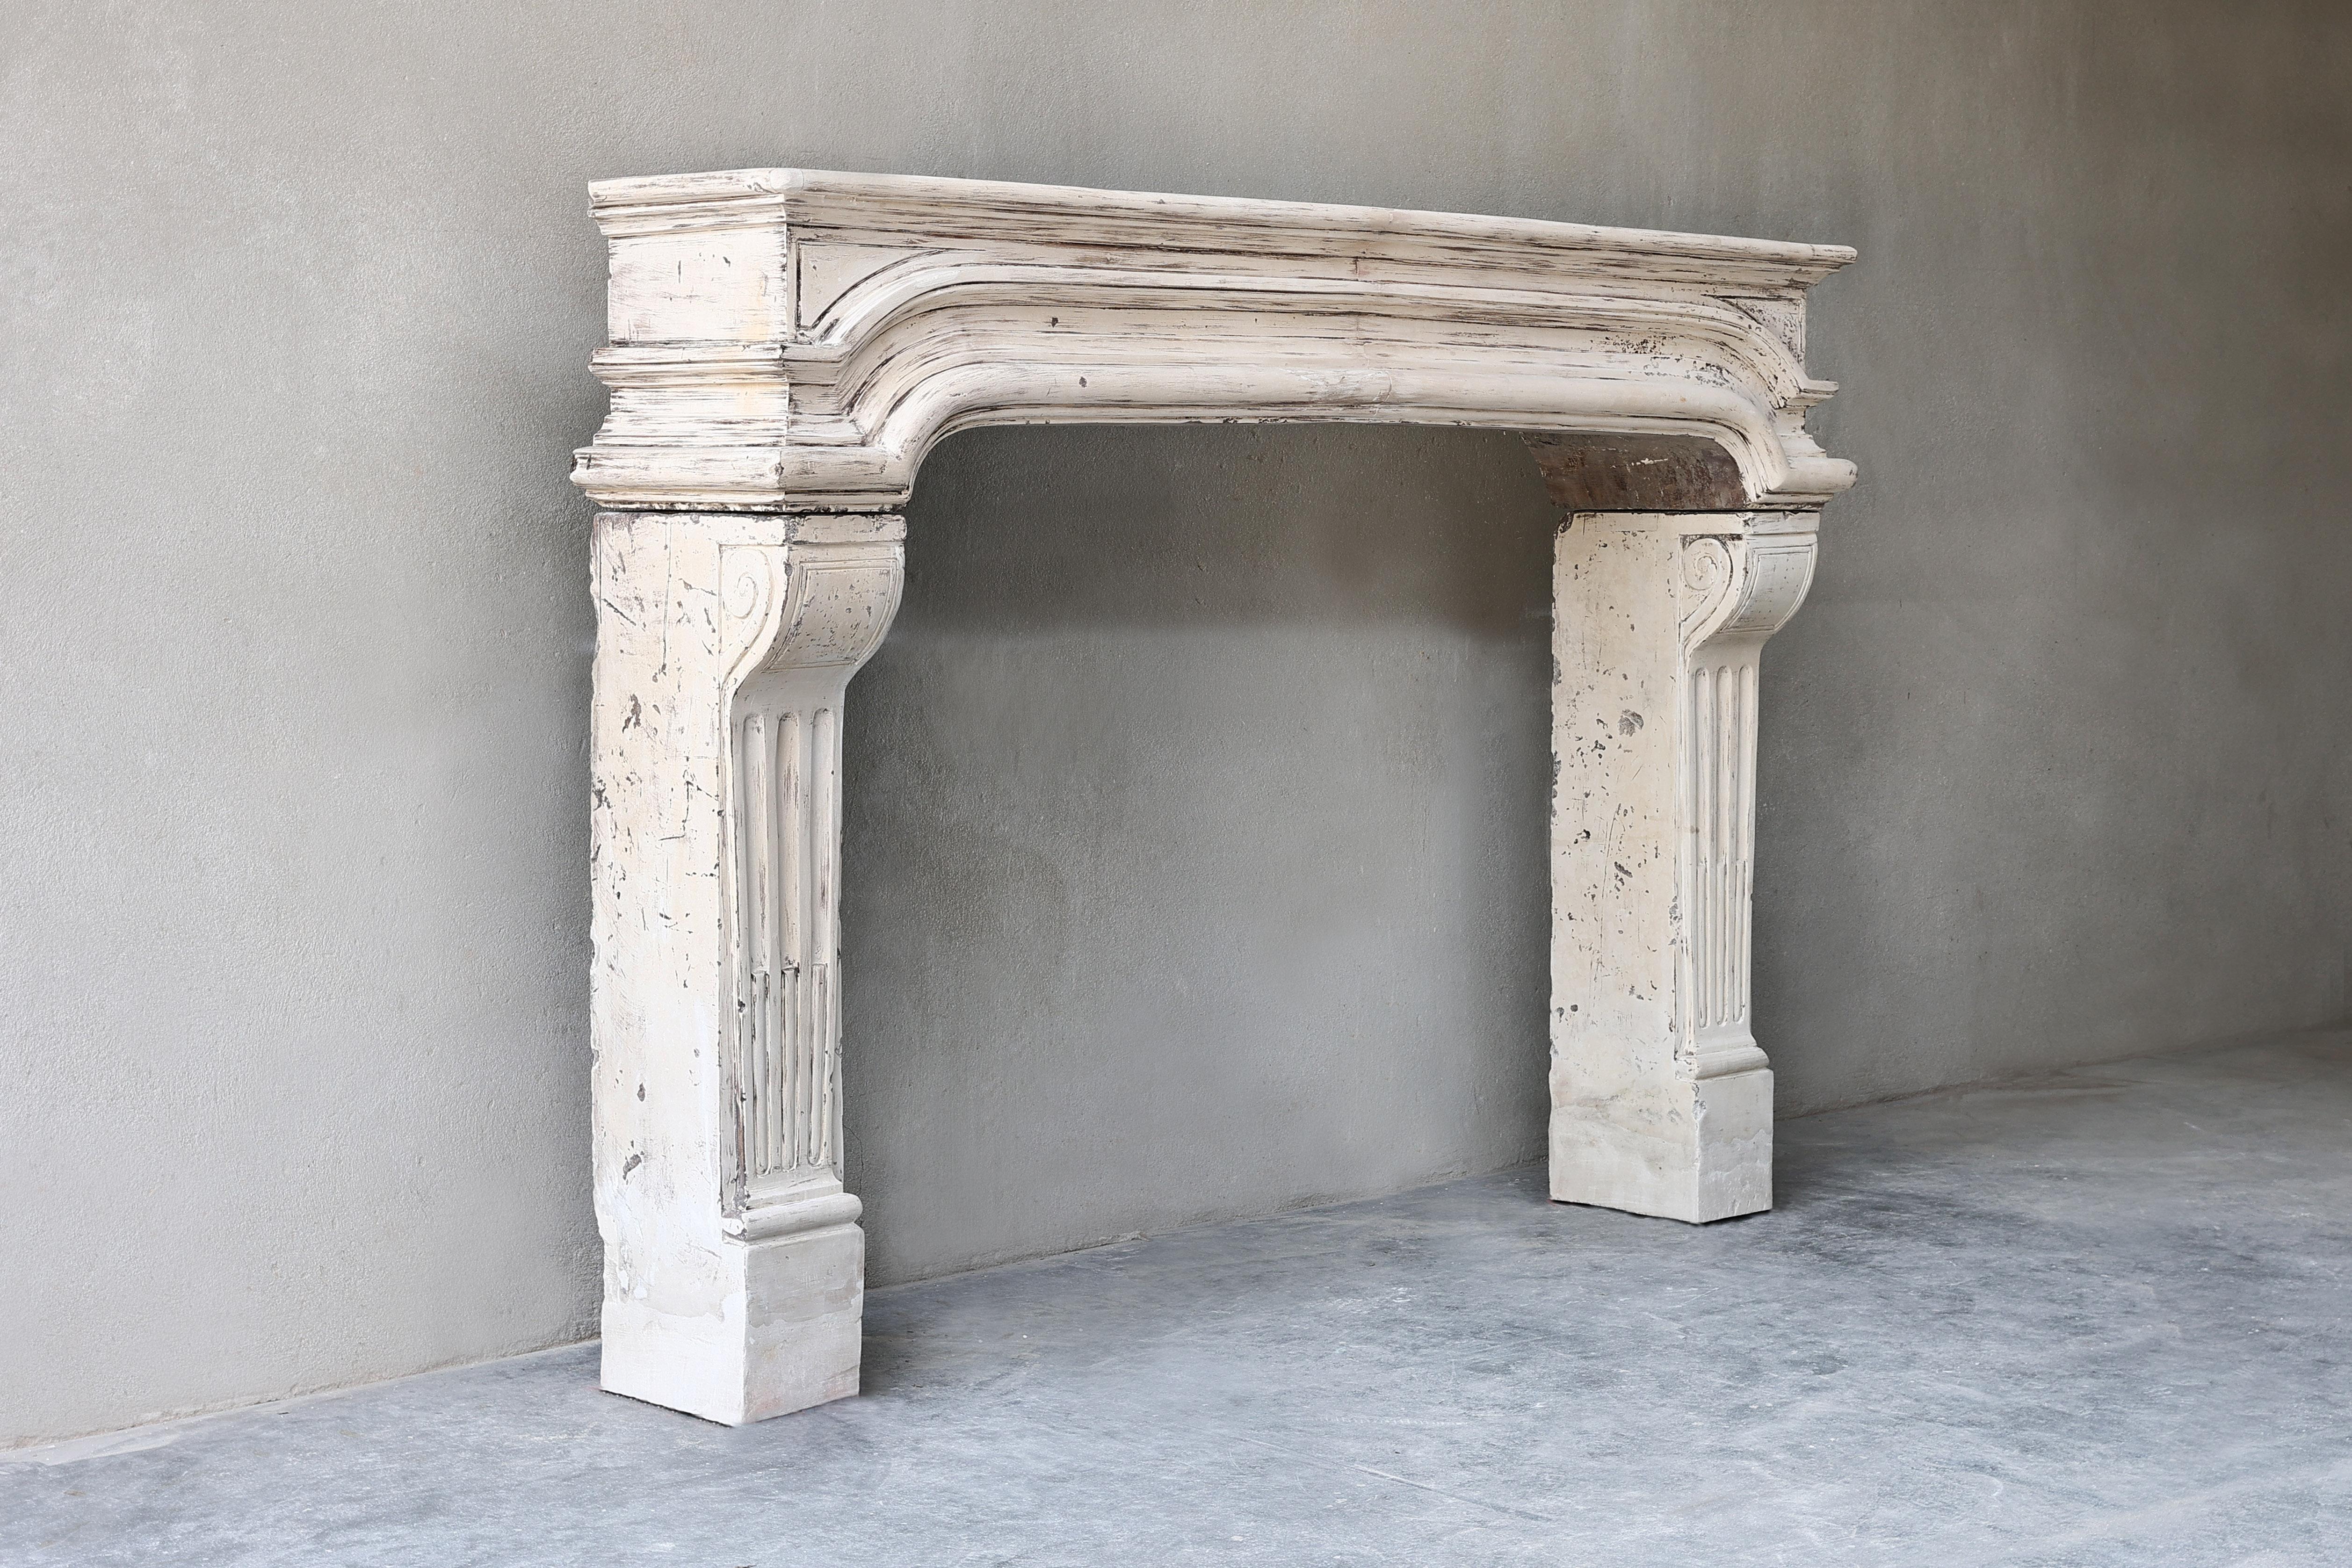 Special antique fireplace of French limestone. A unique item within our collection due to the unusual shape, beautiful lines and fluting on the legs. 
We can offer this fireplace for an attractive price as the freeze/shelf has been broken.
We have